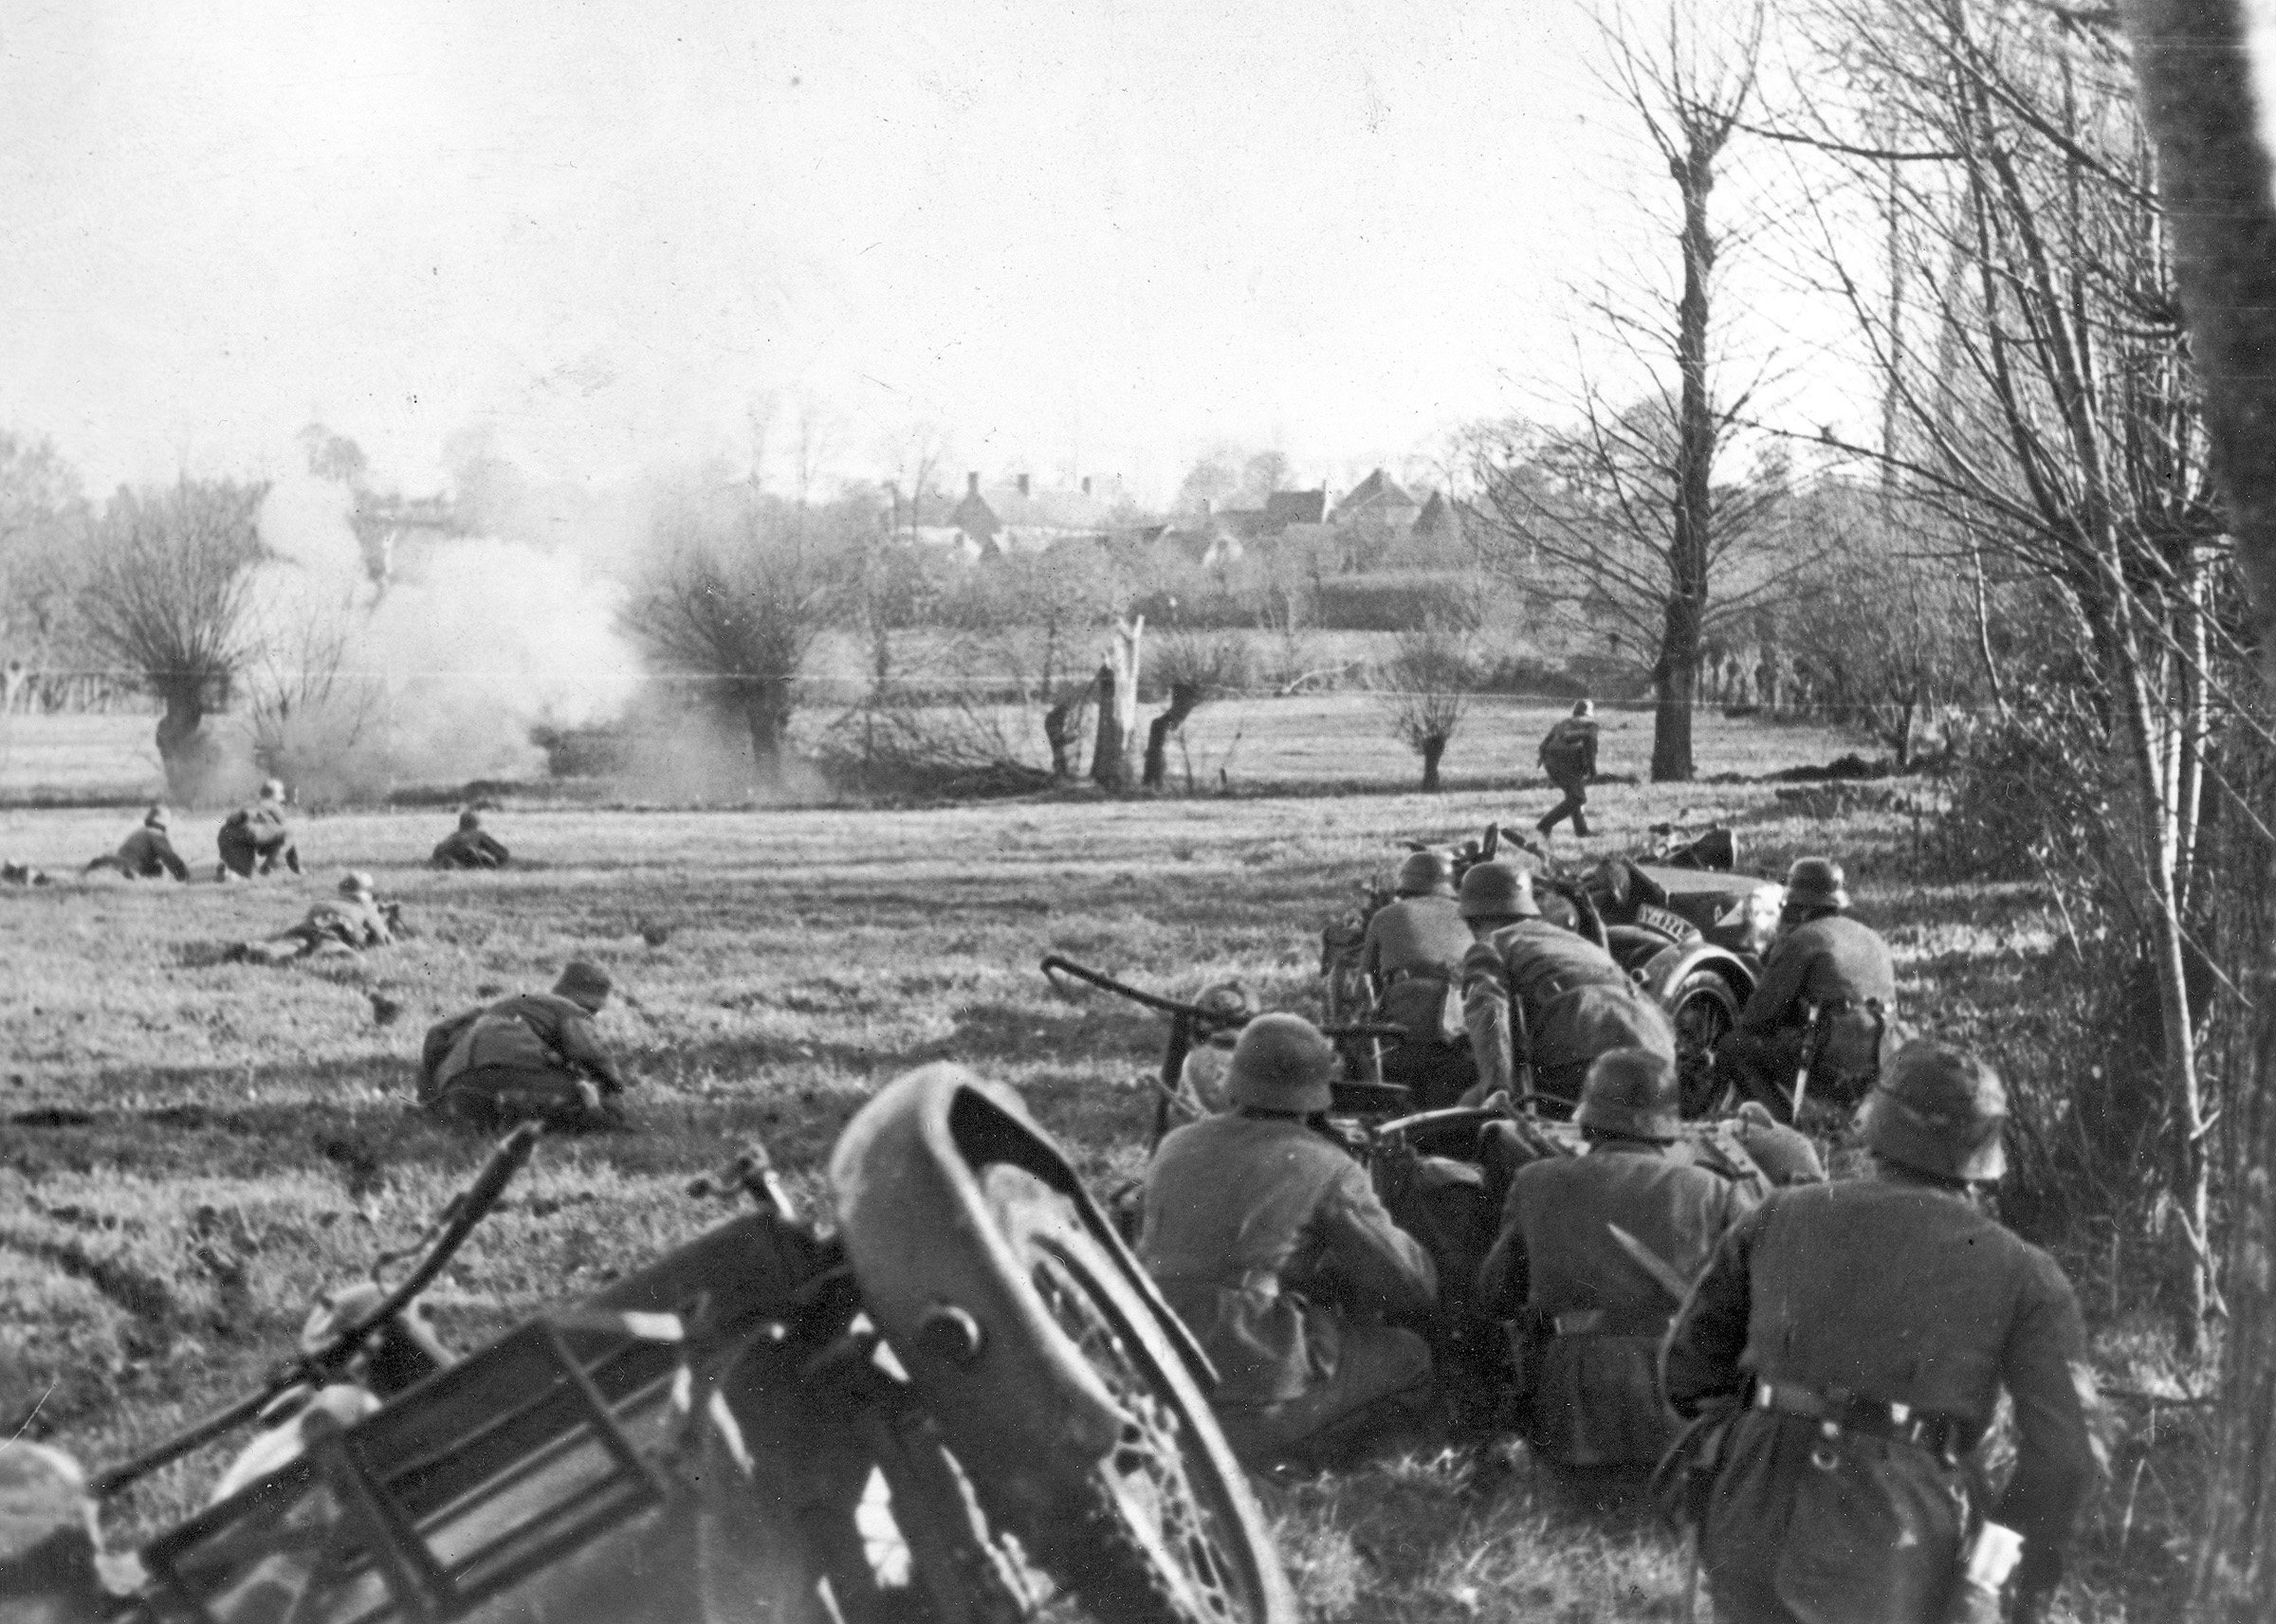 Temporarily halted by a machine-gun nest, members of a German motorcycle infantry platoon maneuver to silence the threat on the outskirts of a French village.